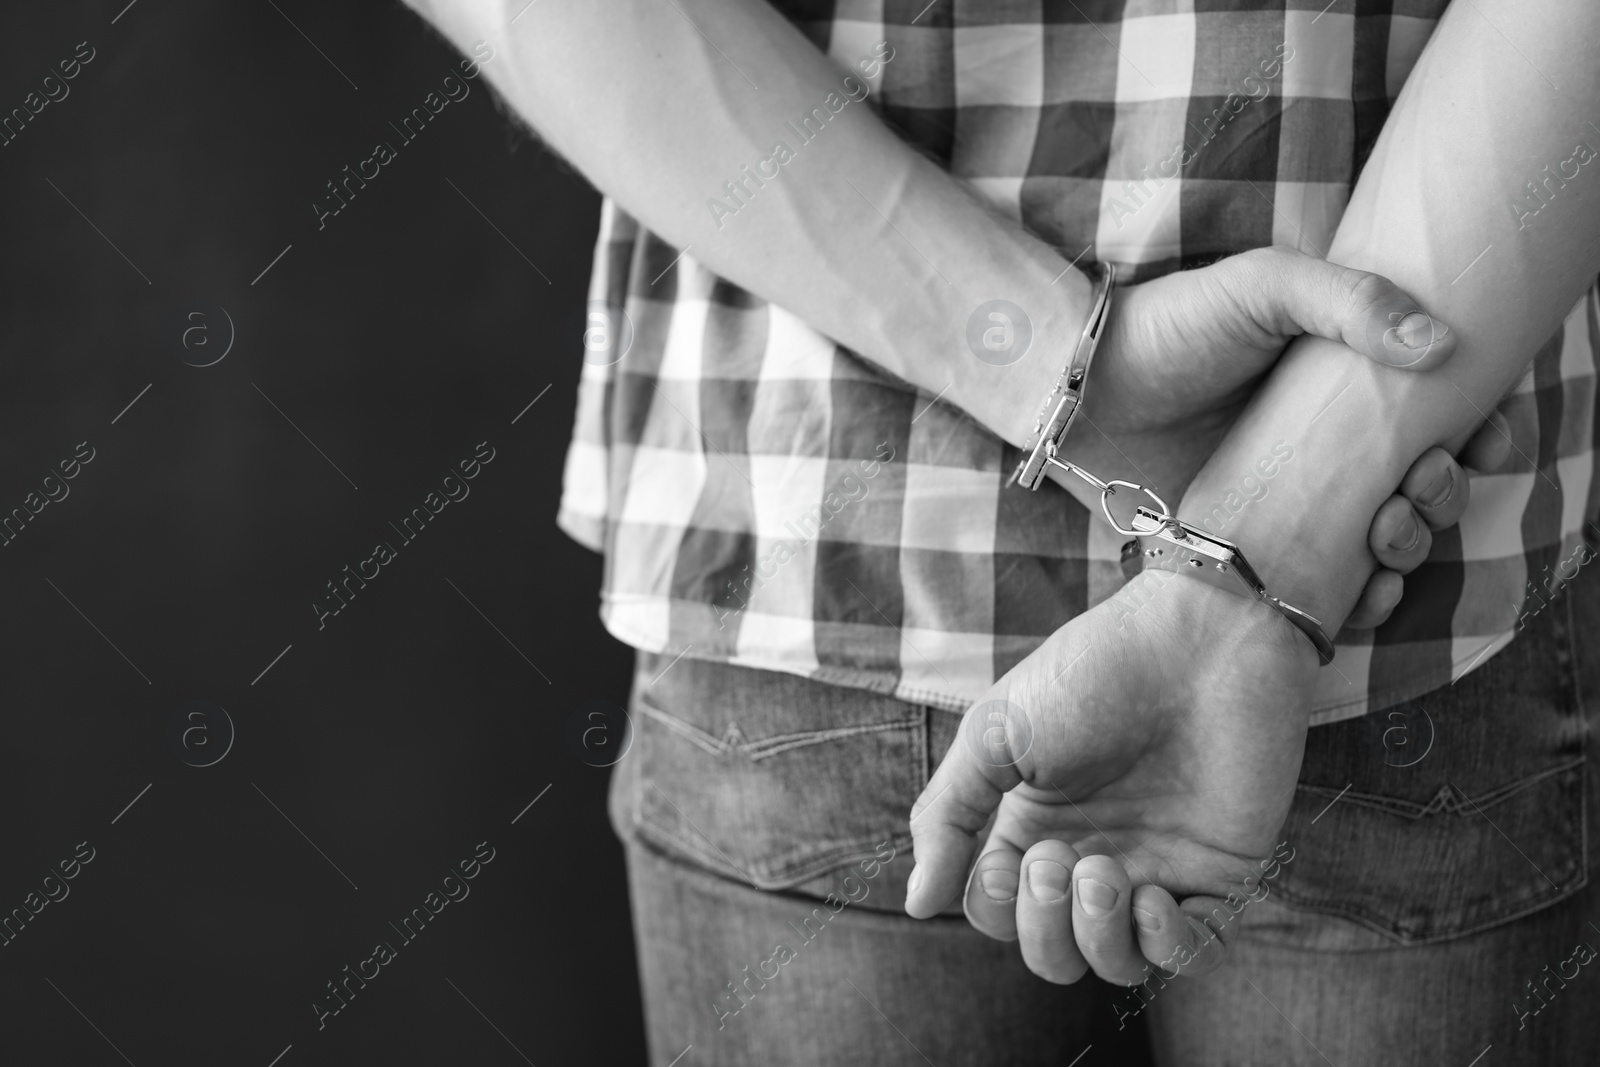 Photo of Criminal detained in handcuffs against dark background, space for text. Black and white effect